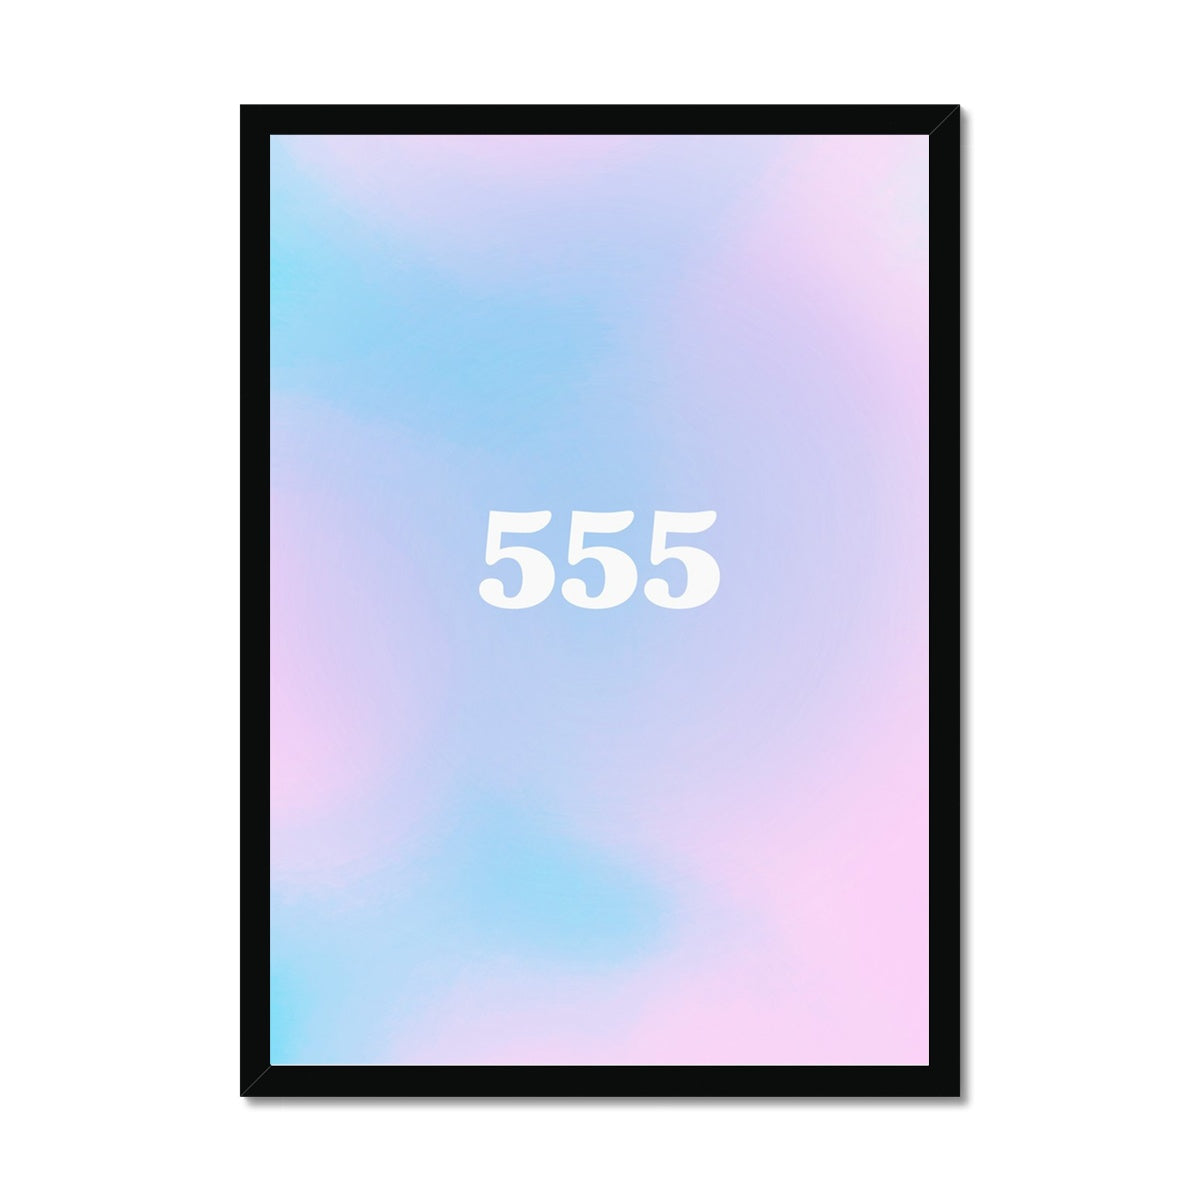 An angel number art print with a gradient aura. Add a touch of angel energy to your walls with a angel number auras. The perfect wall art posters to create a soft and dreamy aesthetic with your apartment or dorm decor. 555 Change: Something New Is Coming.